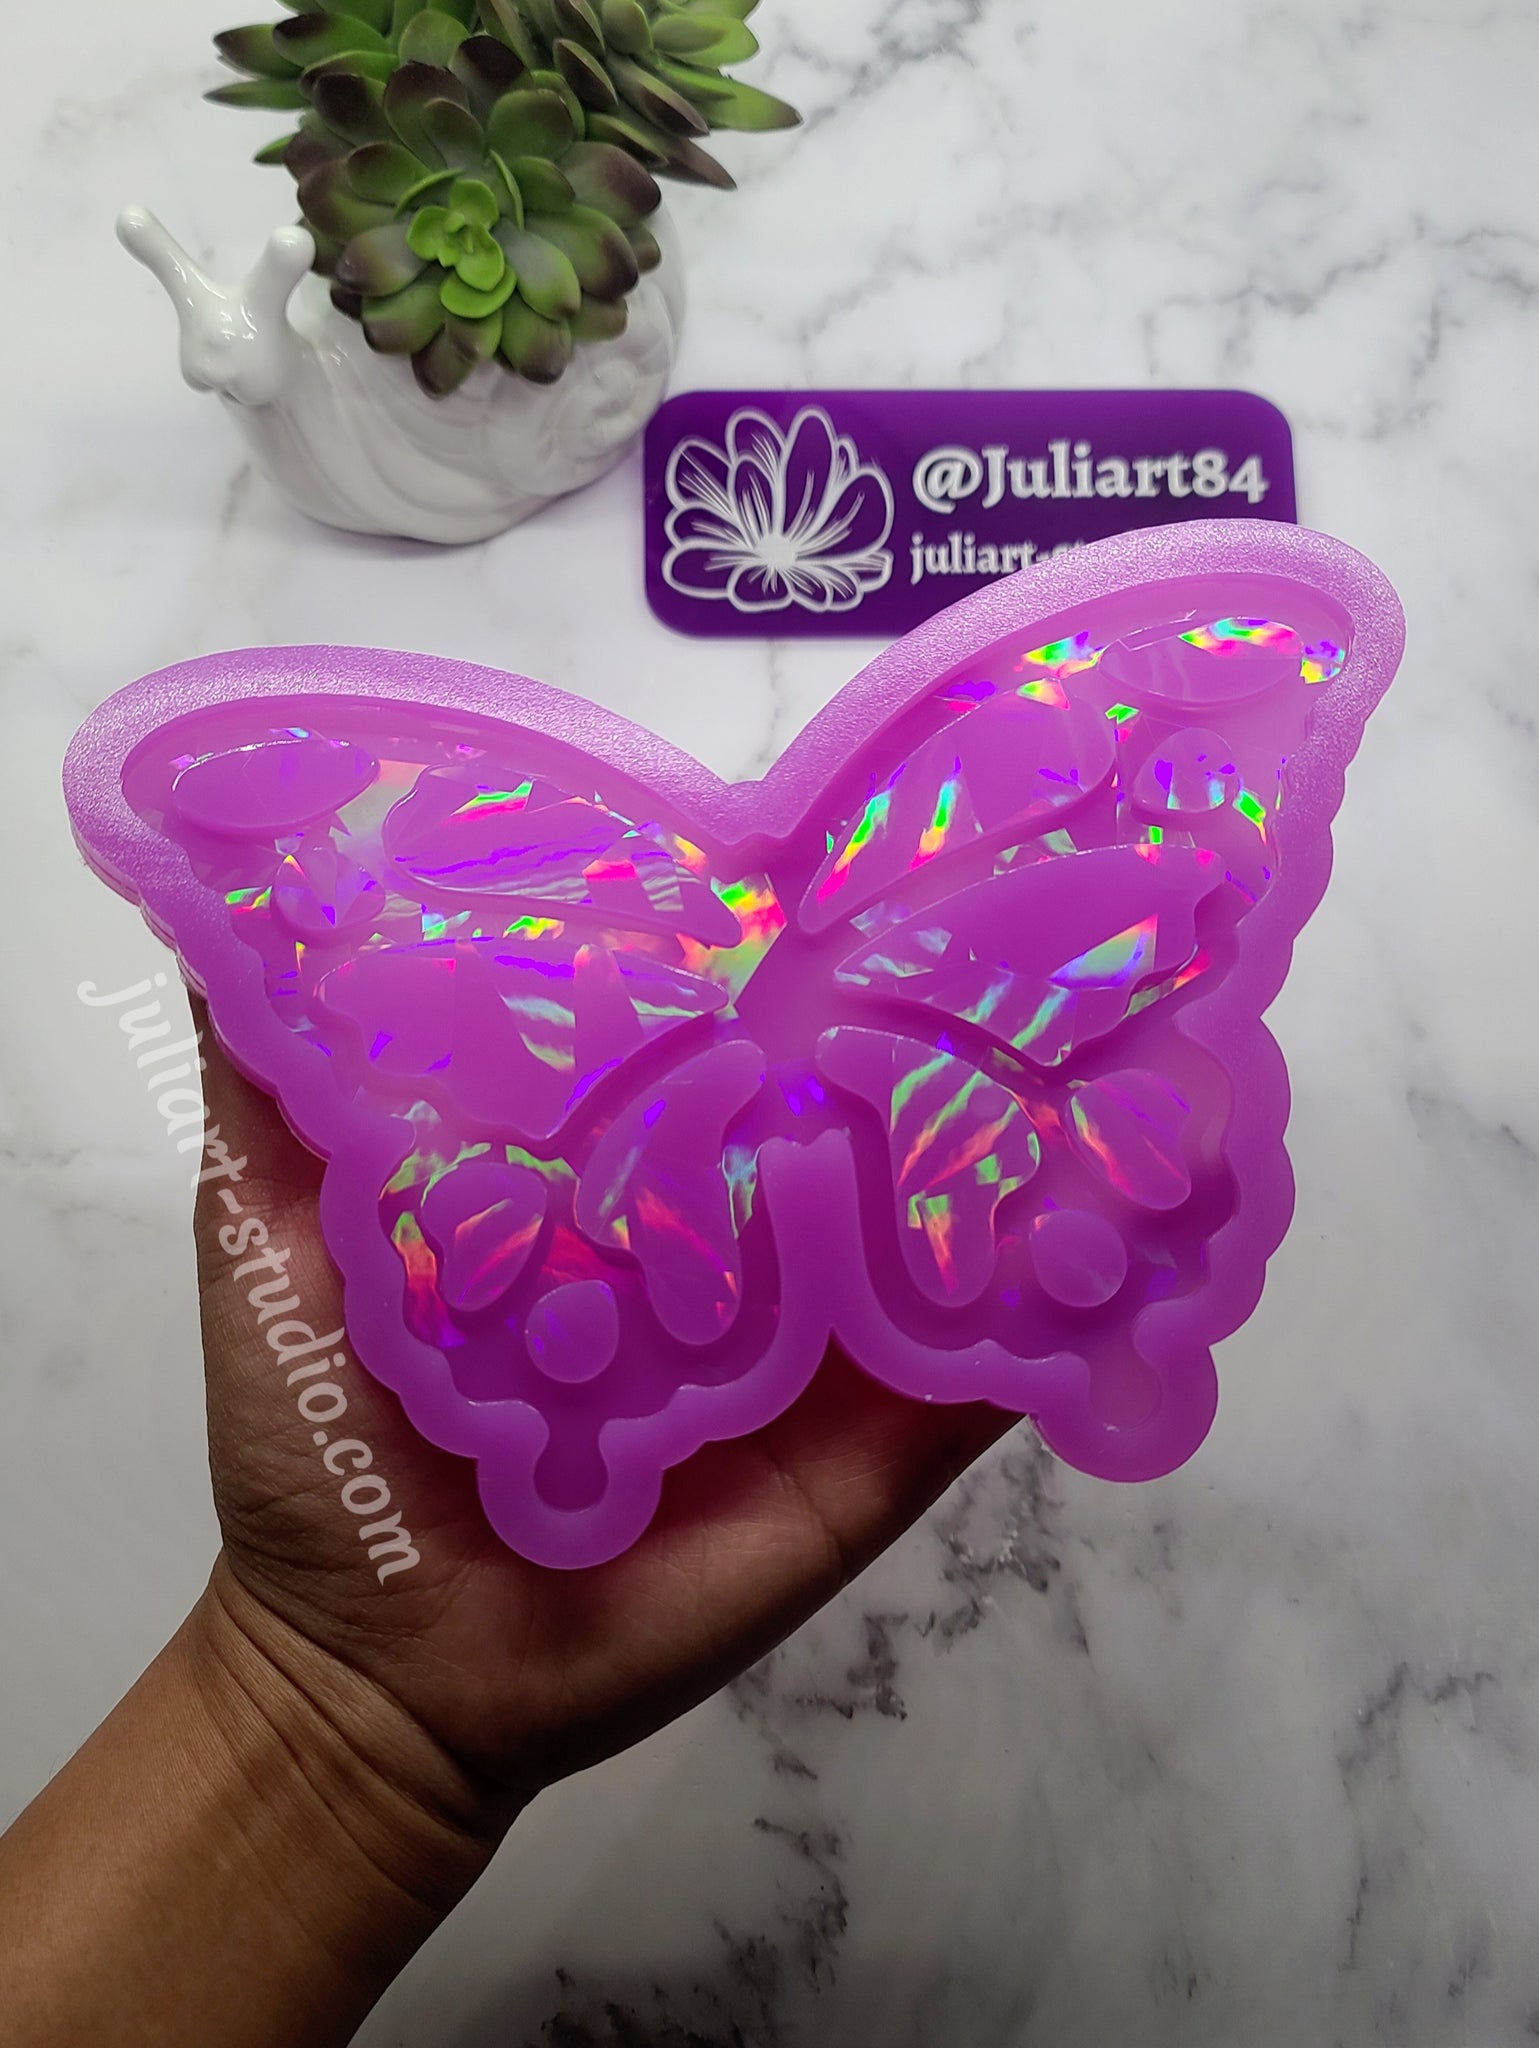 Butterfly Mold, Holographic Butterfly Mold, Mold, Resin Mold, Animal Mold,  Keychain Mold, Silicone Mold, Butterfly, Butterflies, Holographic 